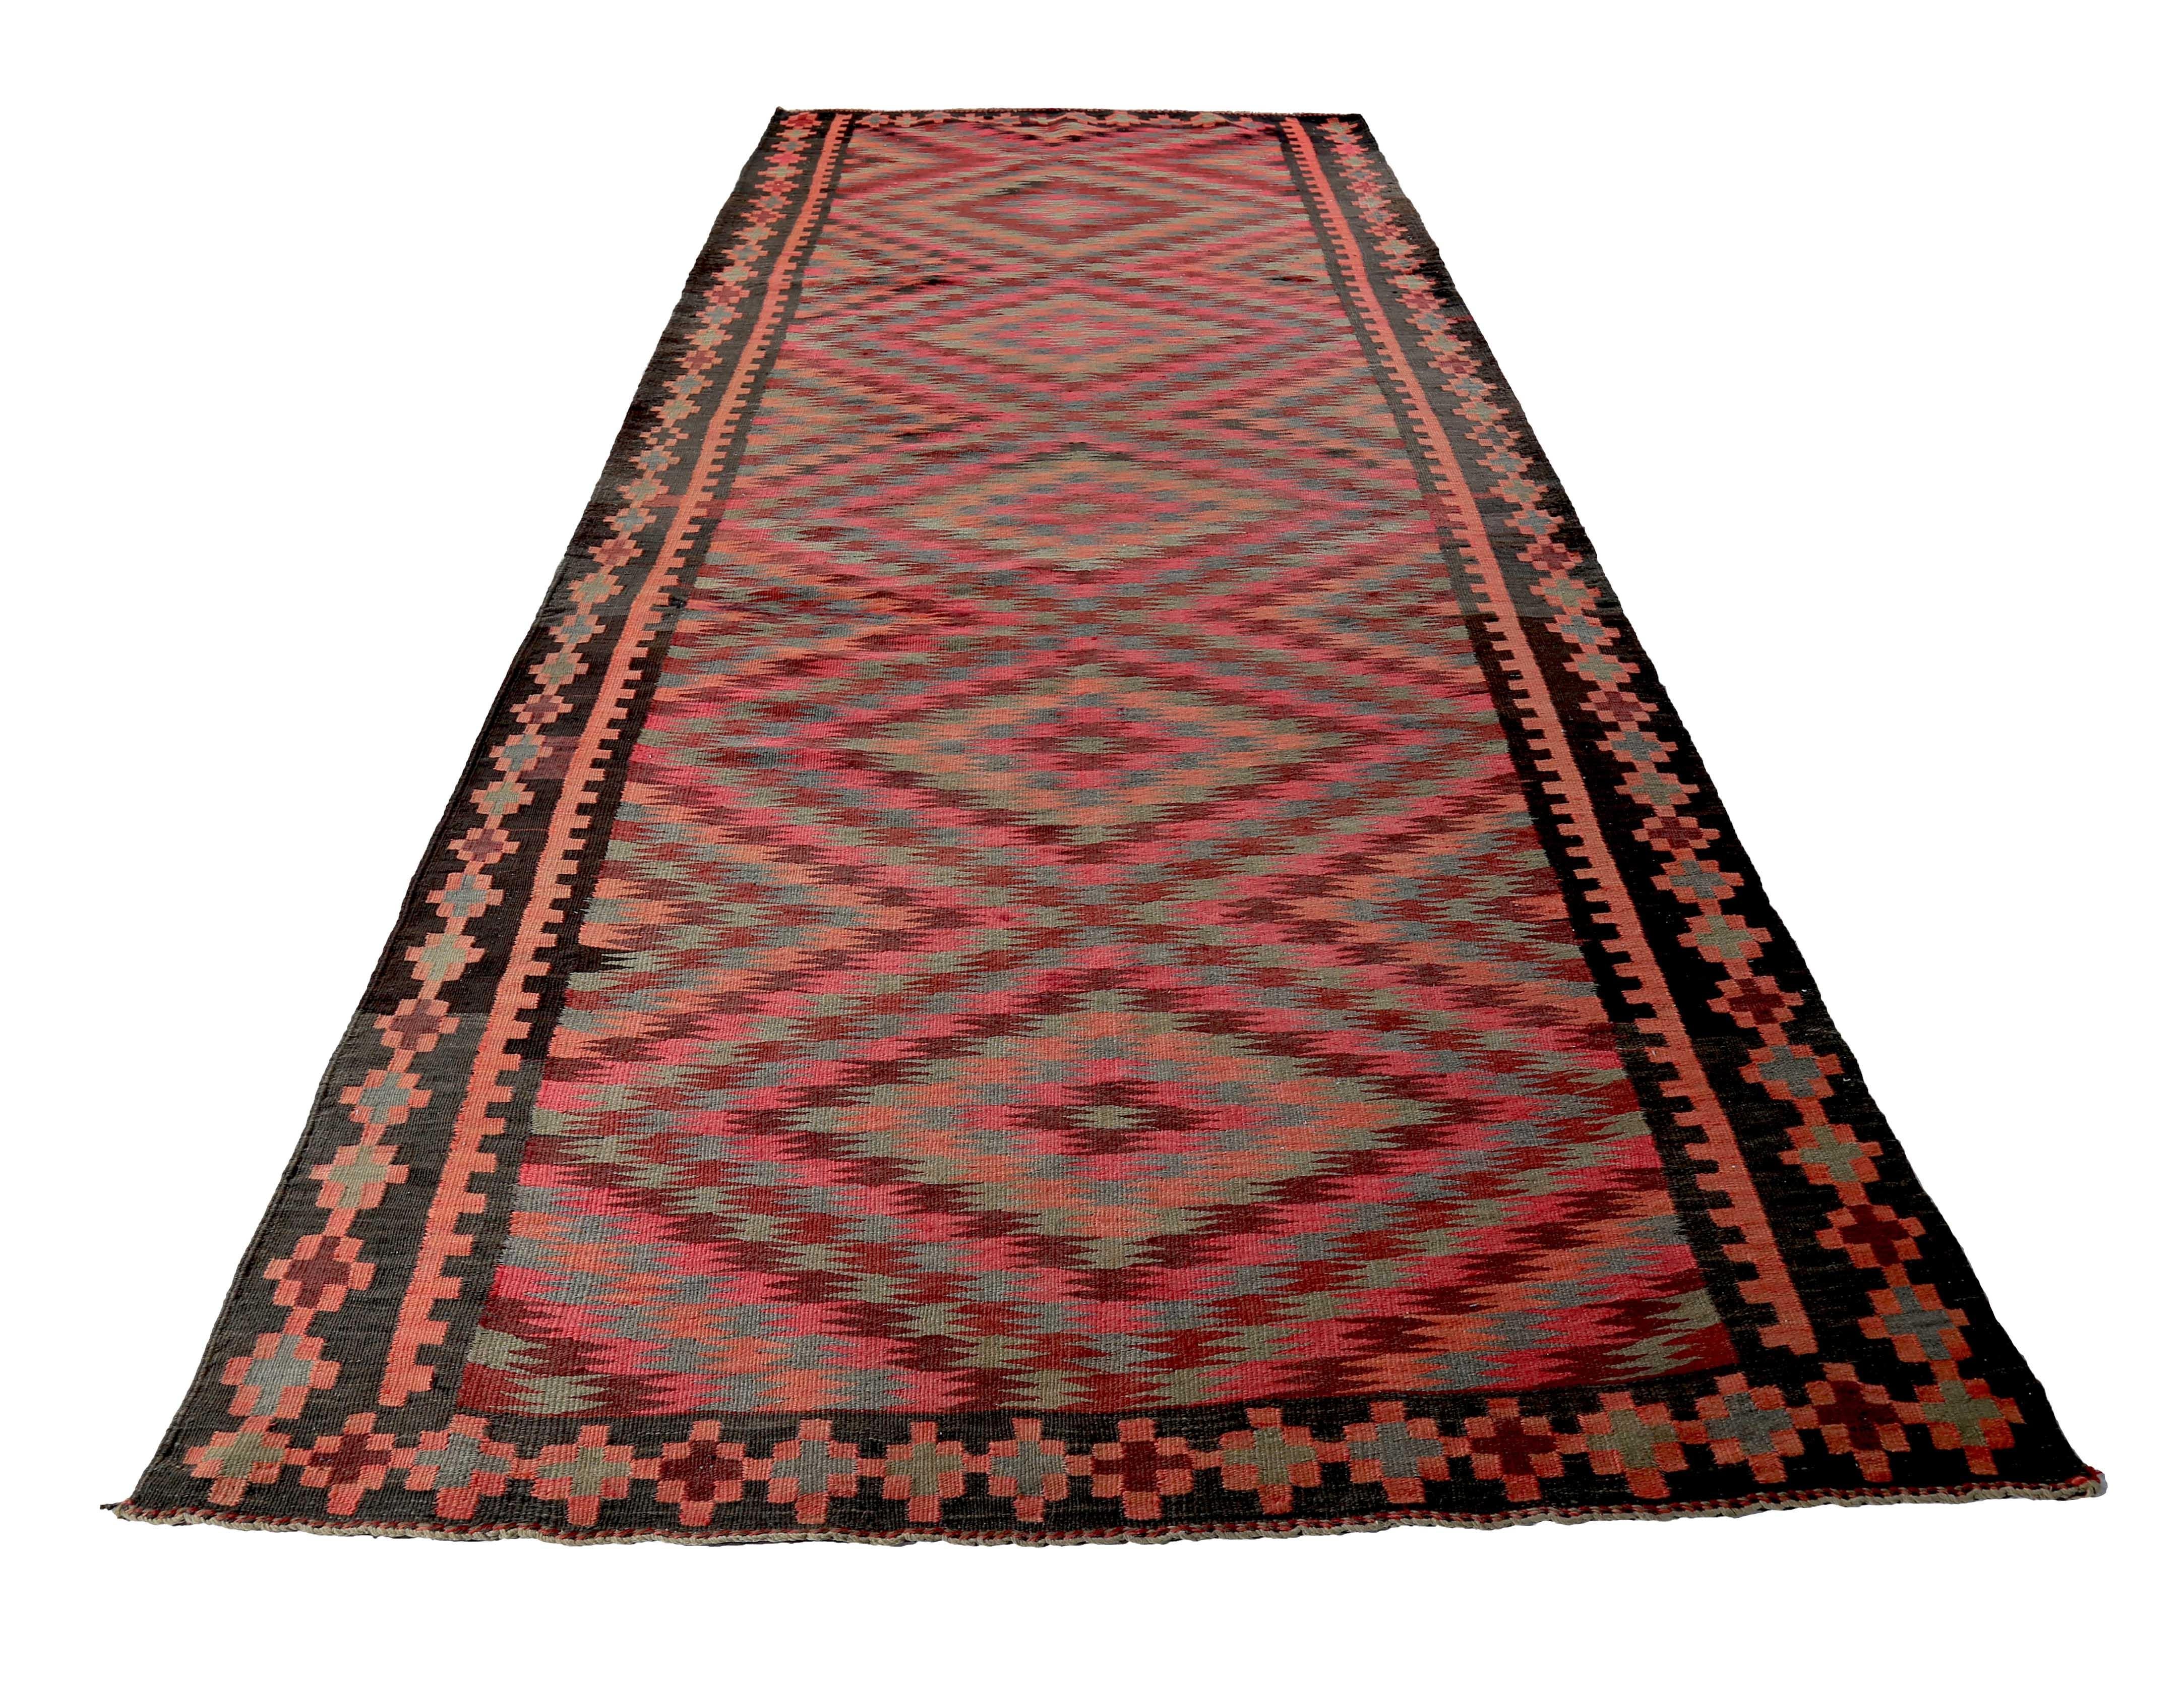 Turkish rug handwoven from the finest sheep’s wool and colored with all-natural vegetable dyes that are safe for humans and pets. It’s a traditional Kilim flat-weave design featuring a red field with green and yellow tribal medallions. It’s a